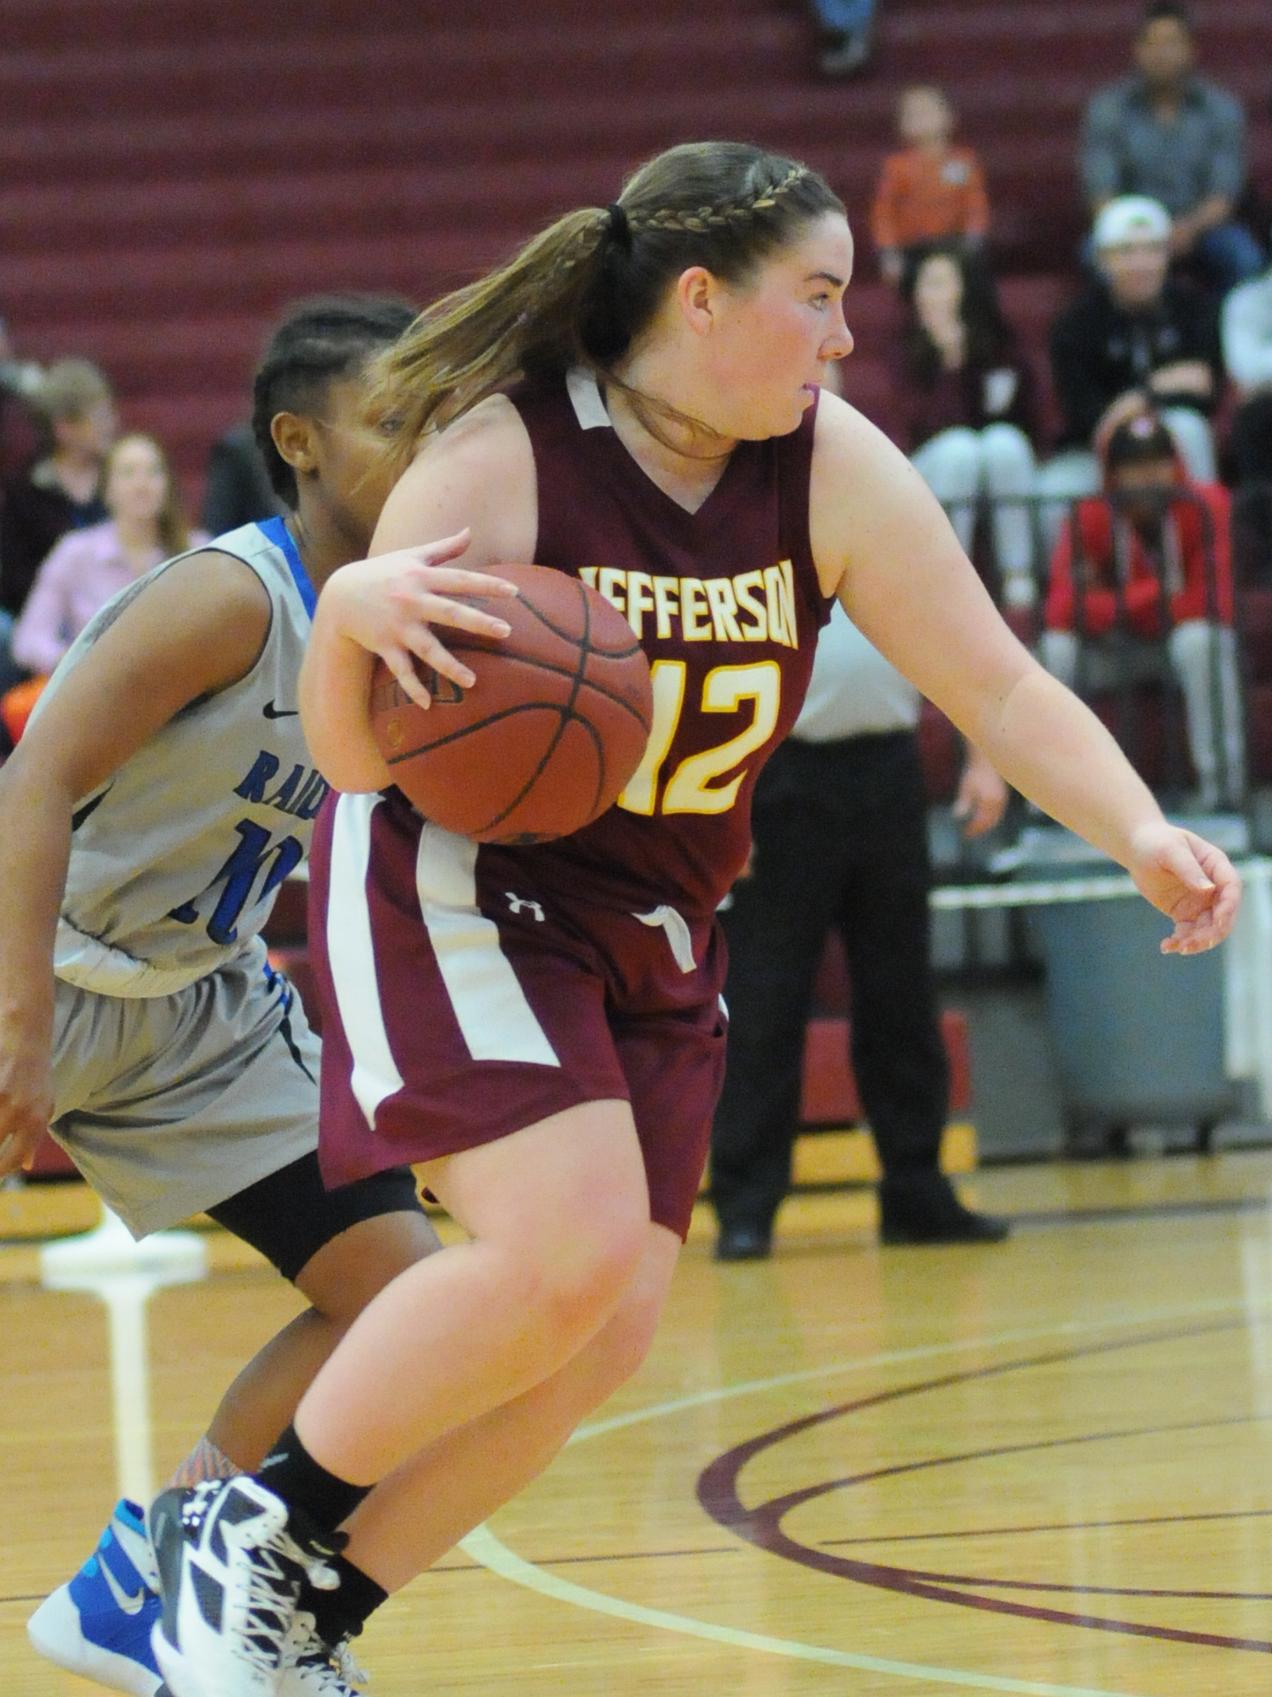 The Lady Cannoneers Win Tough Battle at Broome